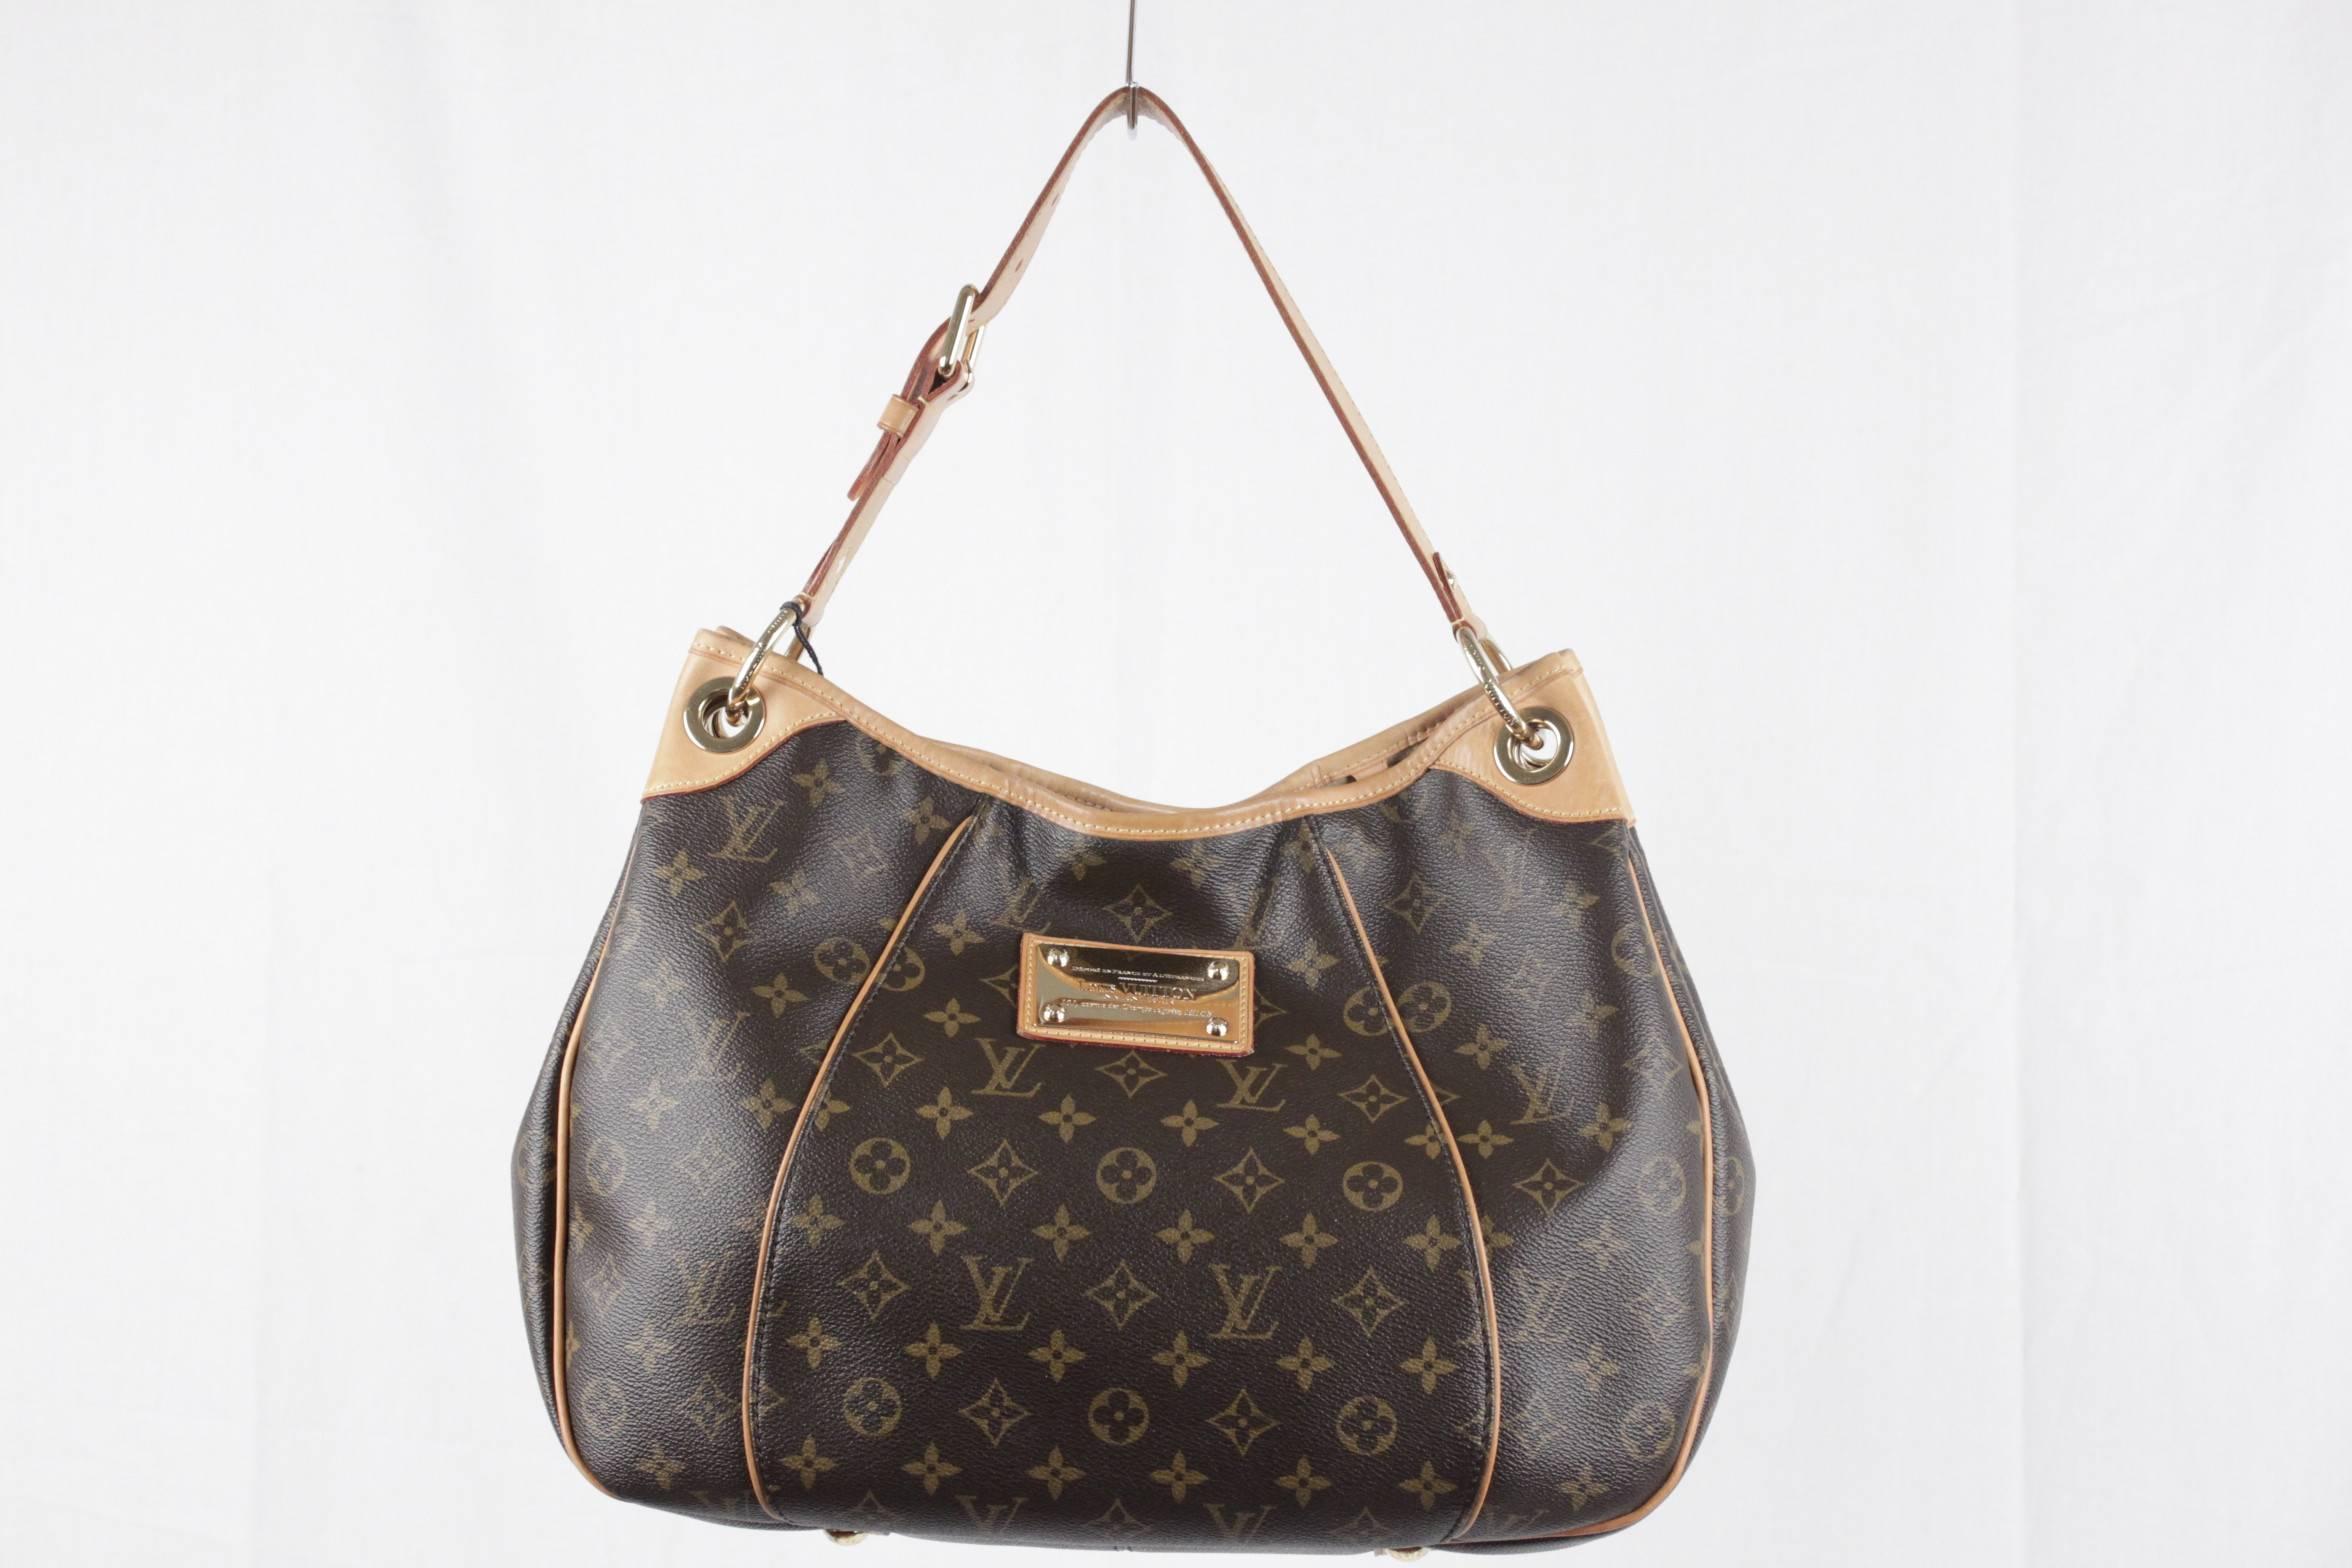 LOUIS VUITTON Brown Monogram Canvas GALLIERA PM HOBO Shoulder Bag TOTE In Excellent Condition In Rome, Rome